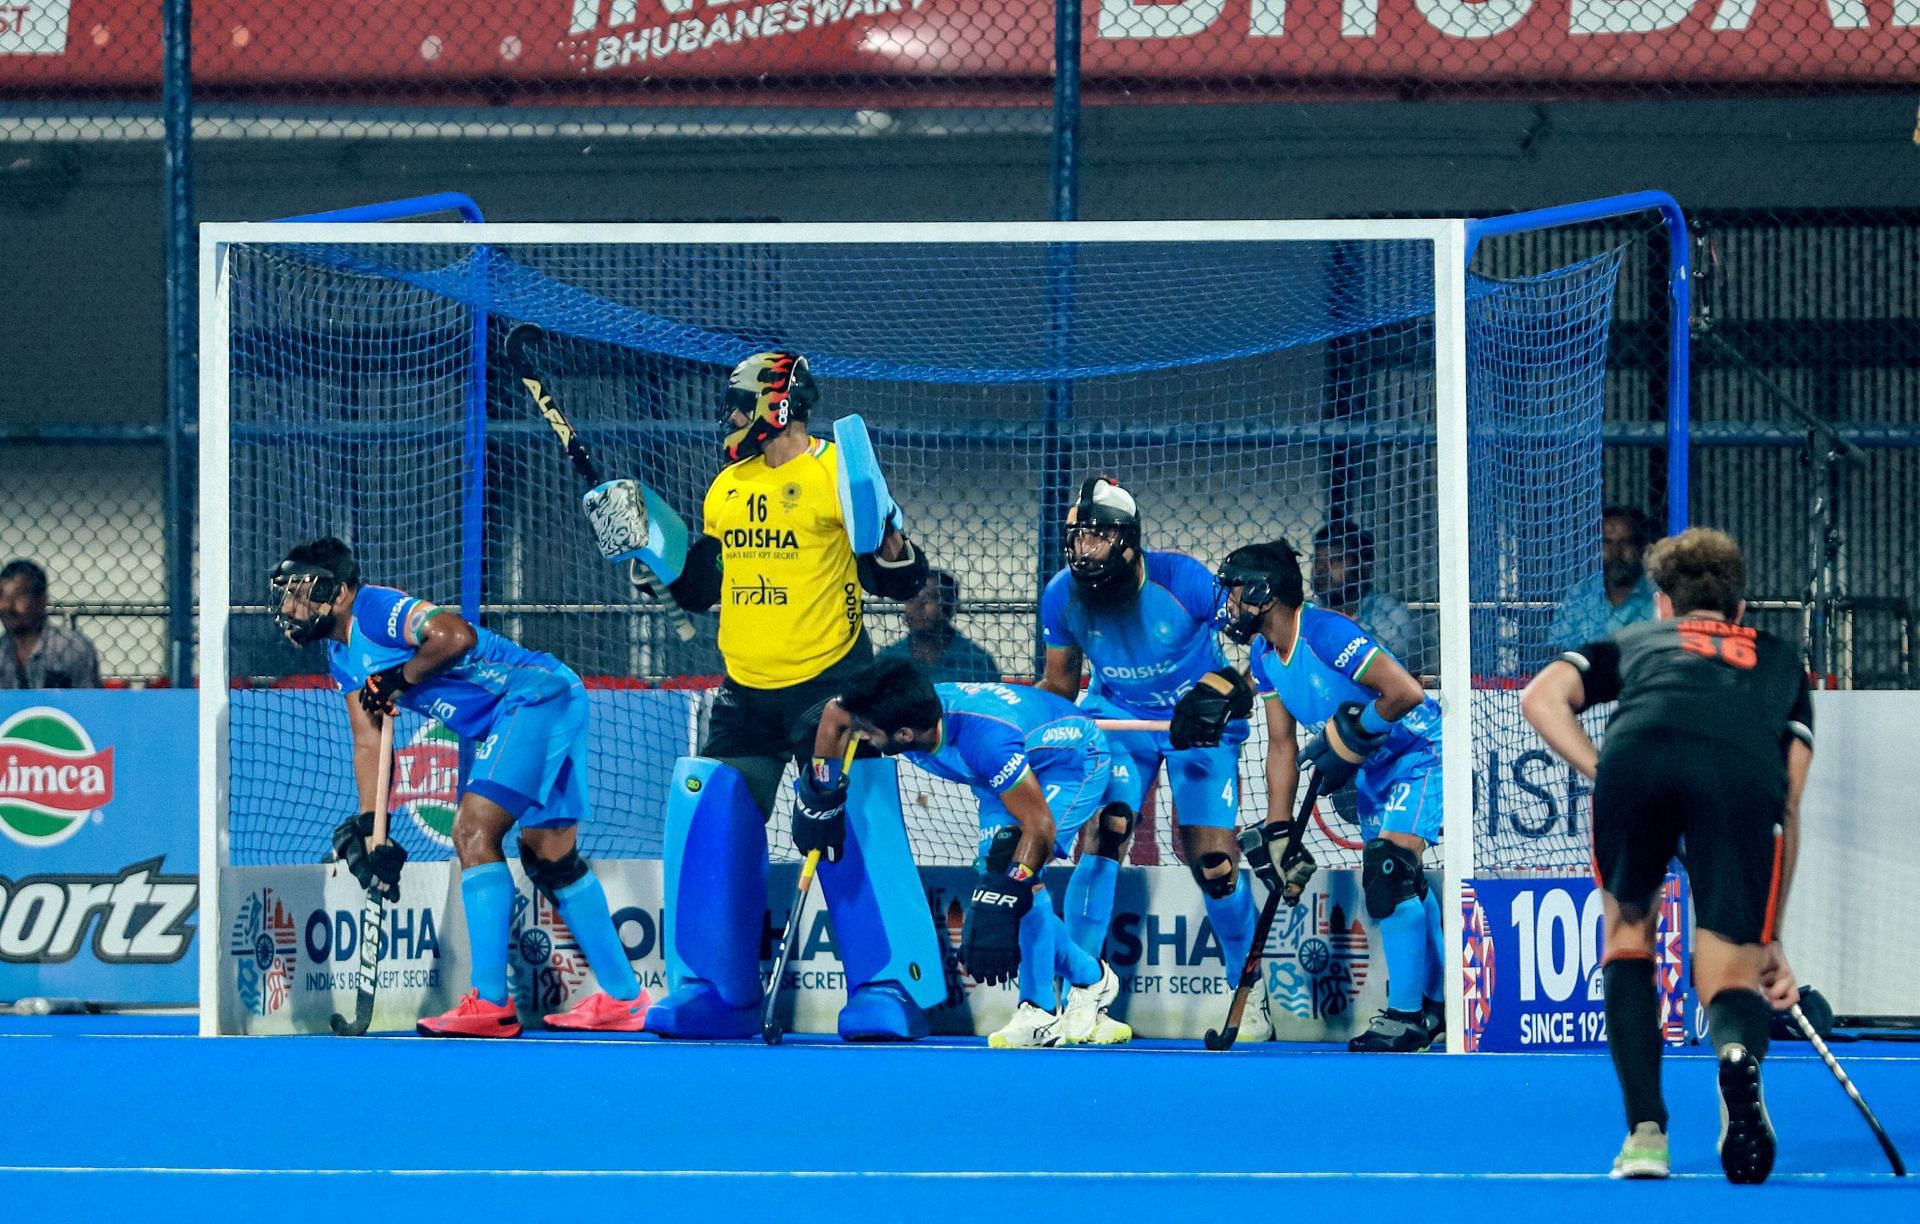 Indian players defend a penalty corner